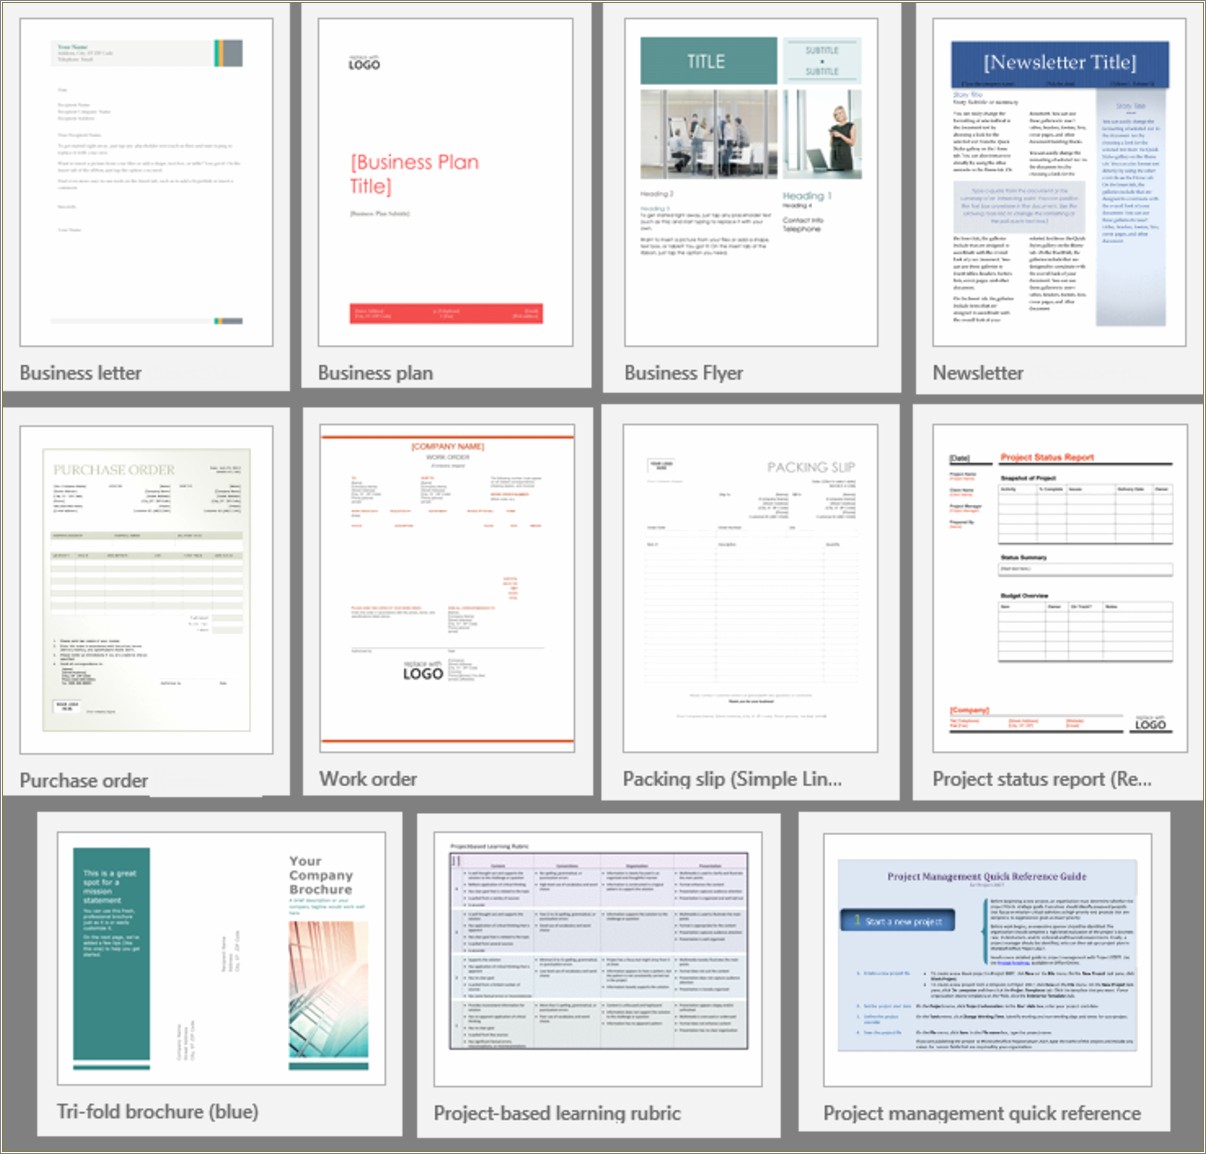 Microsoft Office Word 2007 Templates Free Download